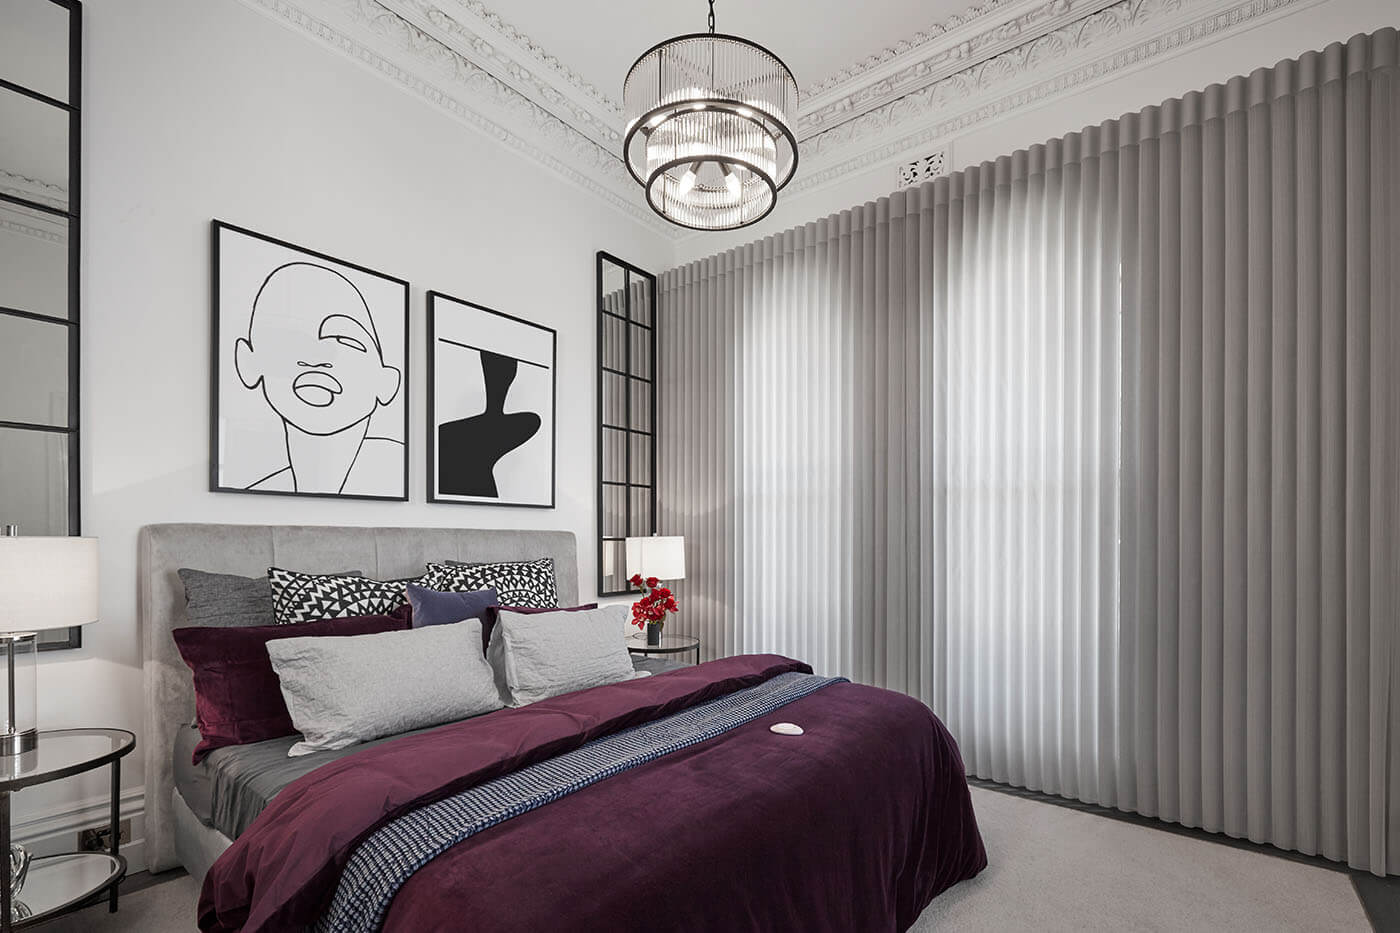 Contemporary bedroom design with purple bedding and line art on wall, featuring Luxaflex Luminette Sheers elegantly covering the room's windows.